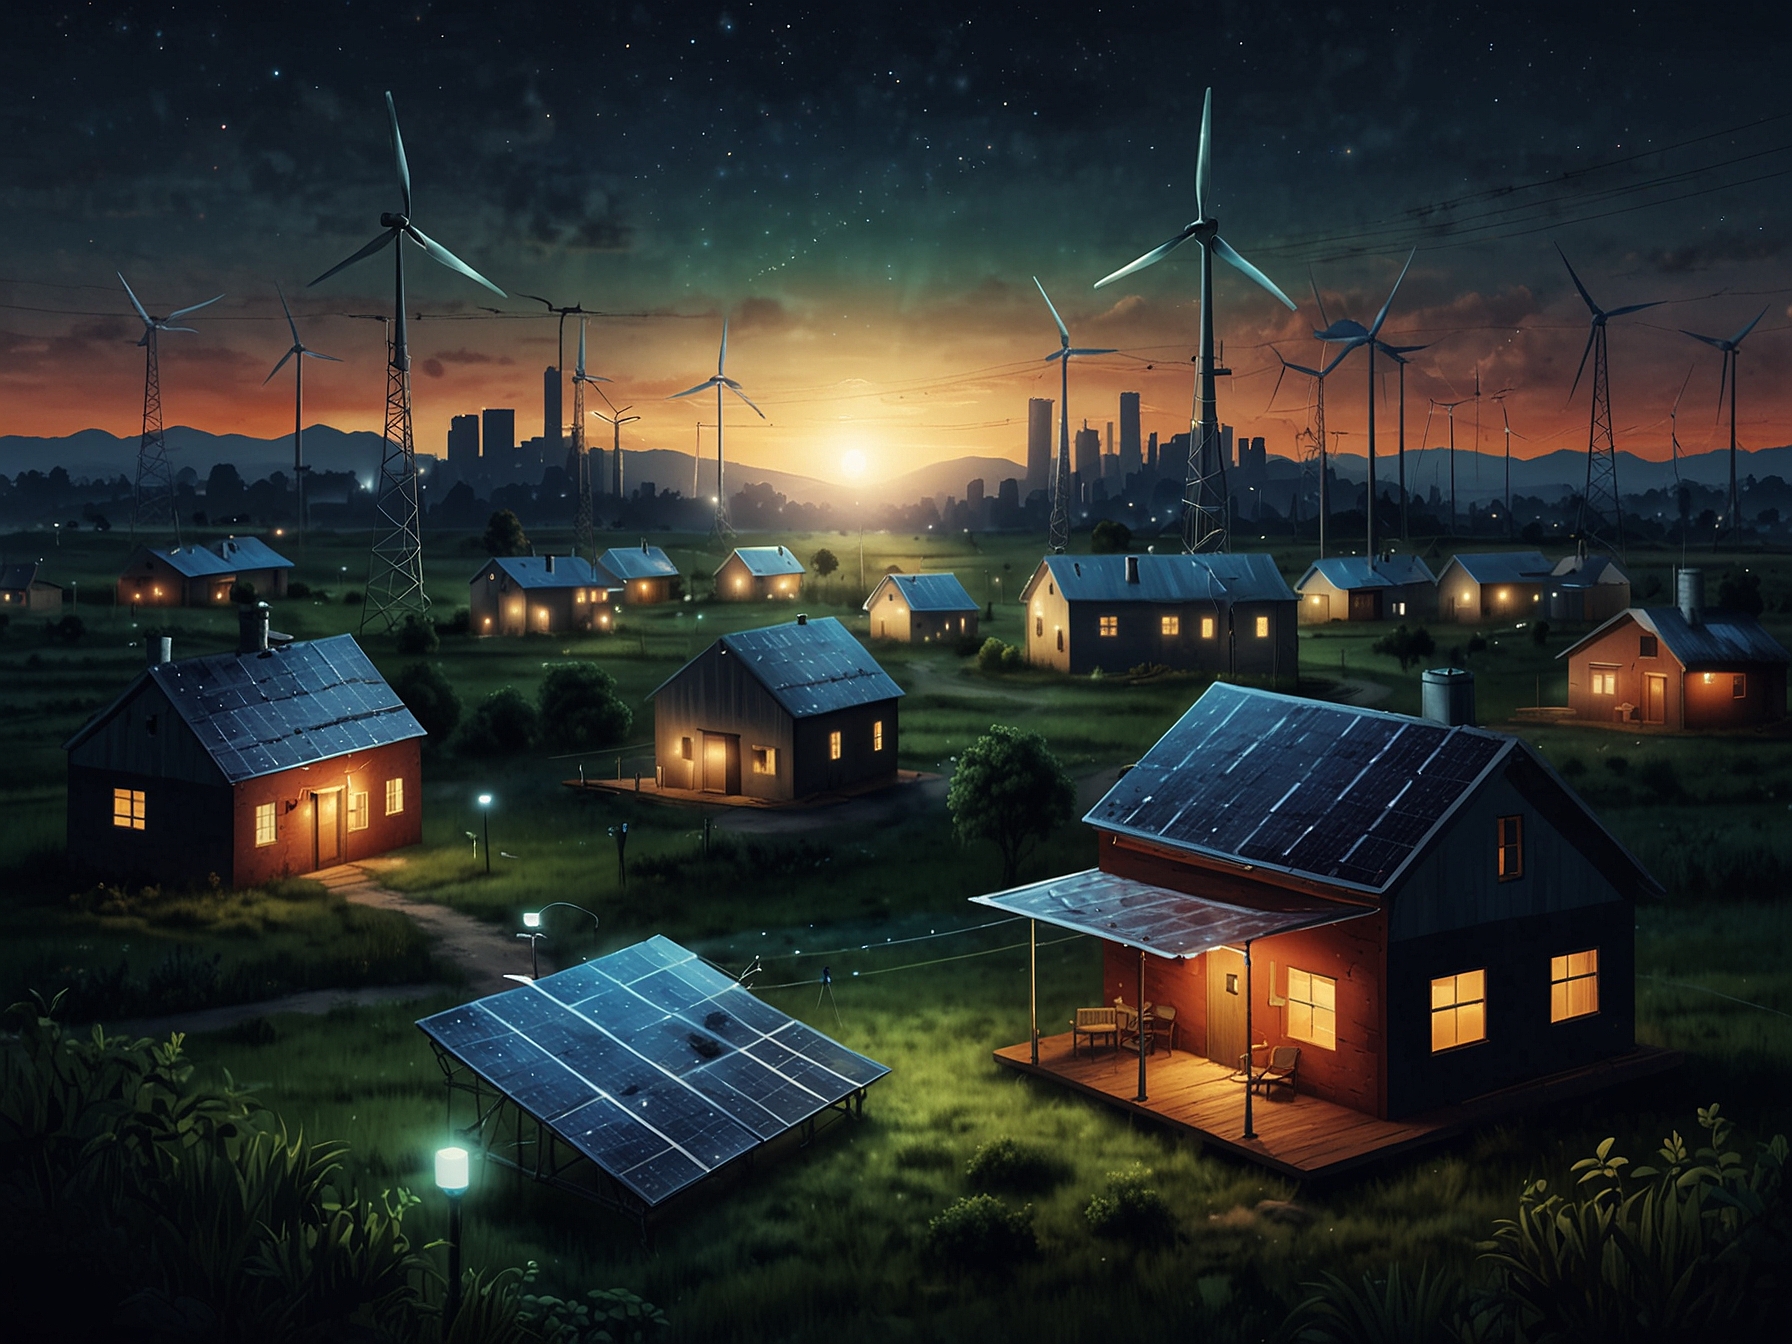 An illustration showing a decentralized energy grid where multiple local communities generate, store, and distribute renewable energy. This setup highlights the democratization and efficiency of DePIN.